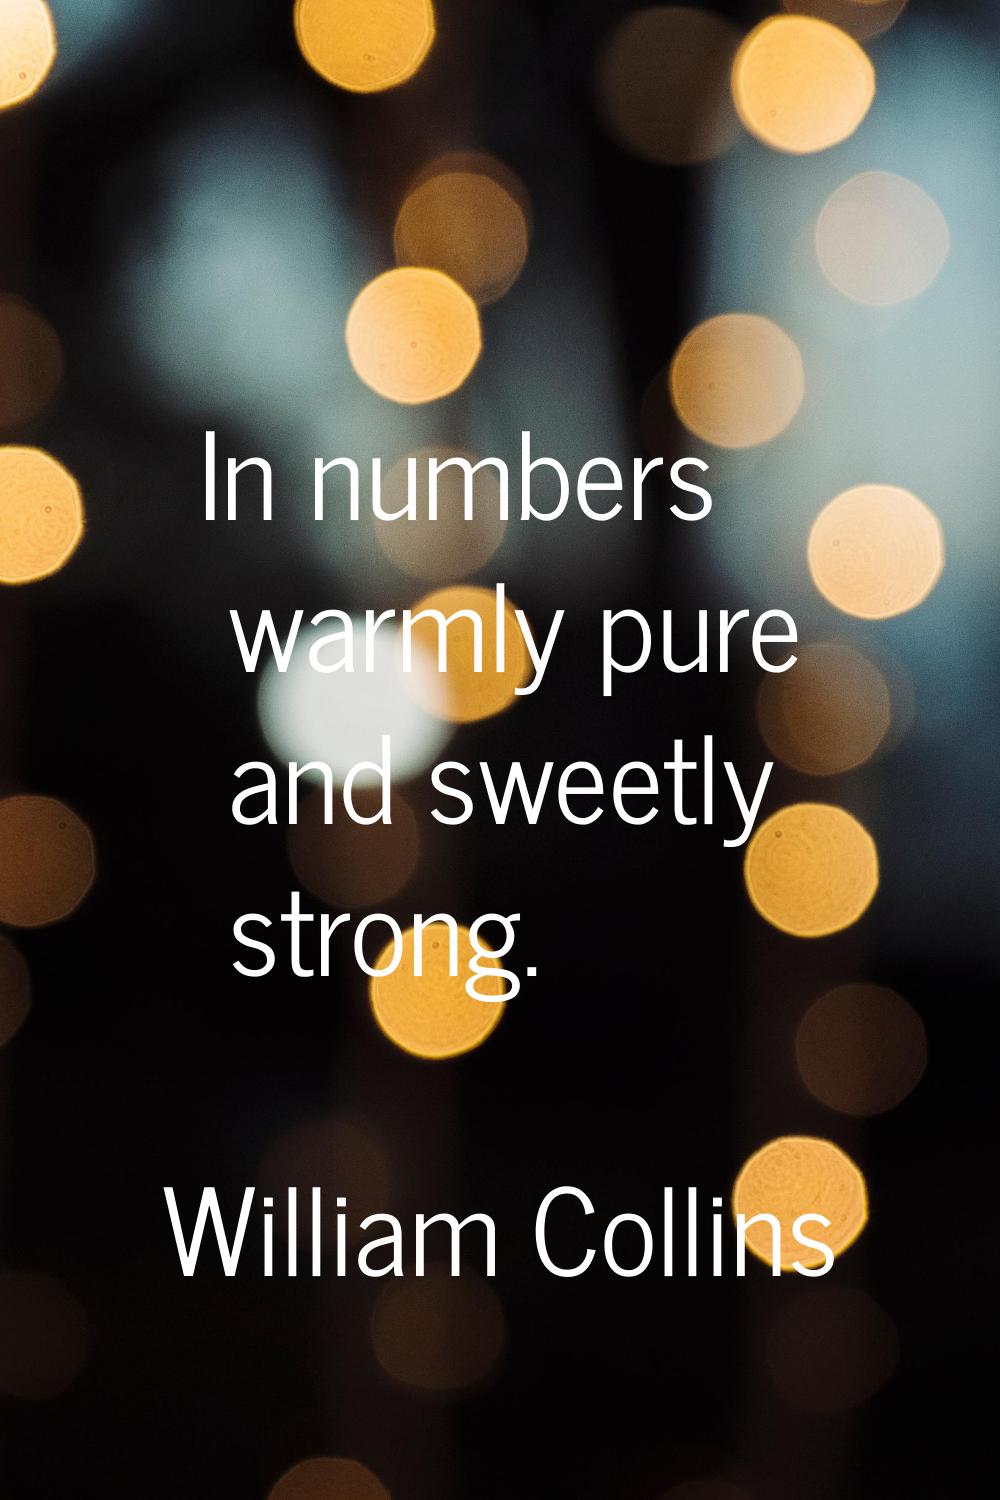 In numbers warmly pure and sweetly strong.